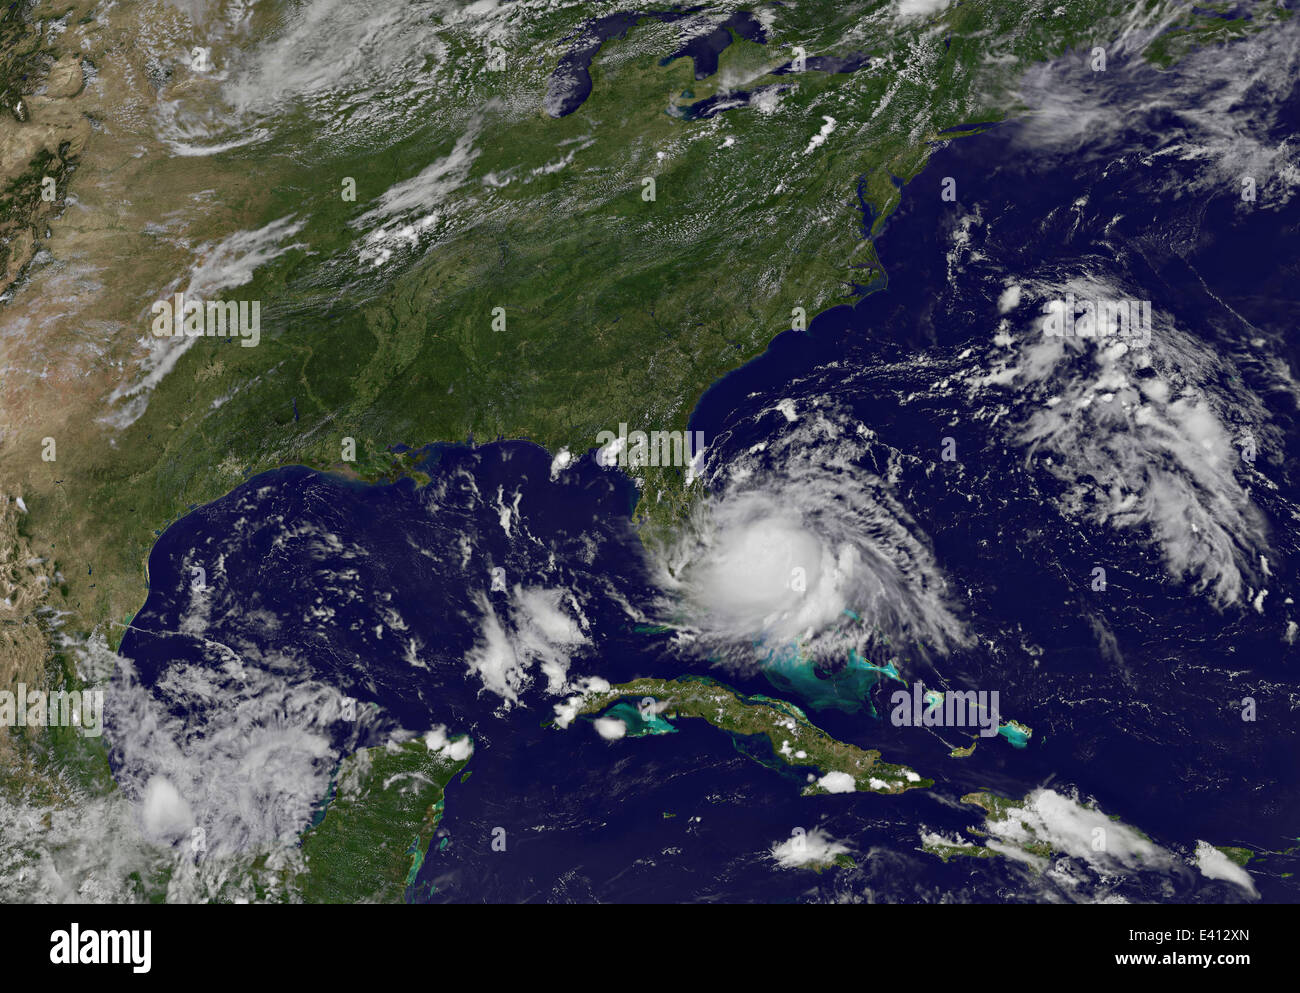 Satellite imagery shows the first Atlantic tropical storm of the 2014 season as it gathers strength off the coast of Florida July 1, 2014 near Settlement Point, Grand Bahama Island. The cyclone is expected to become Hurricane Arthur within 72 hours and move up the east coast making landfall on the Outer Banks of North Carolina. Stock Photo